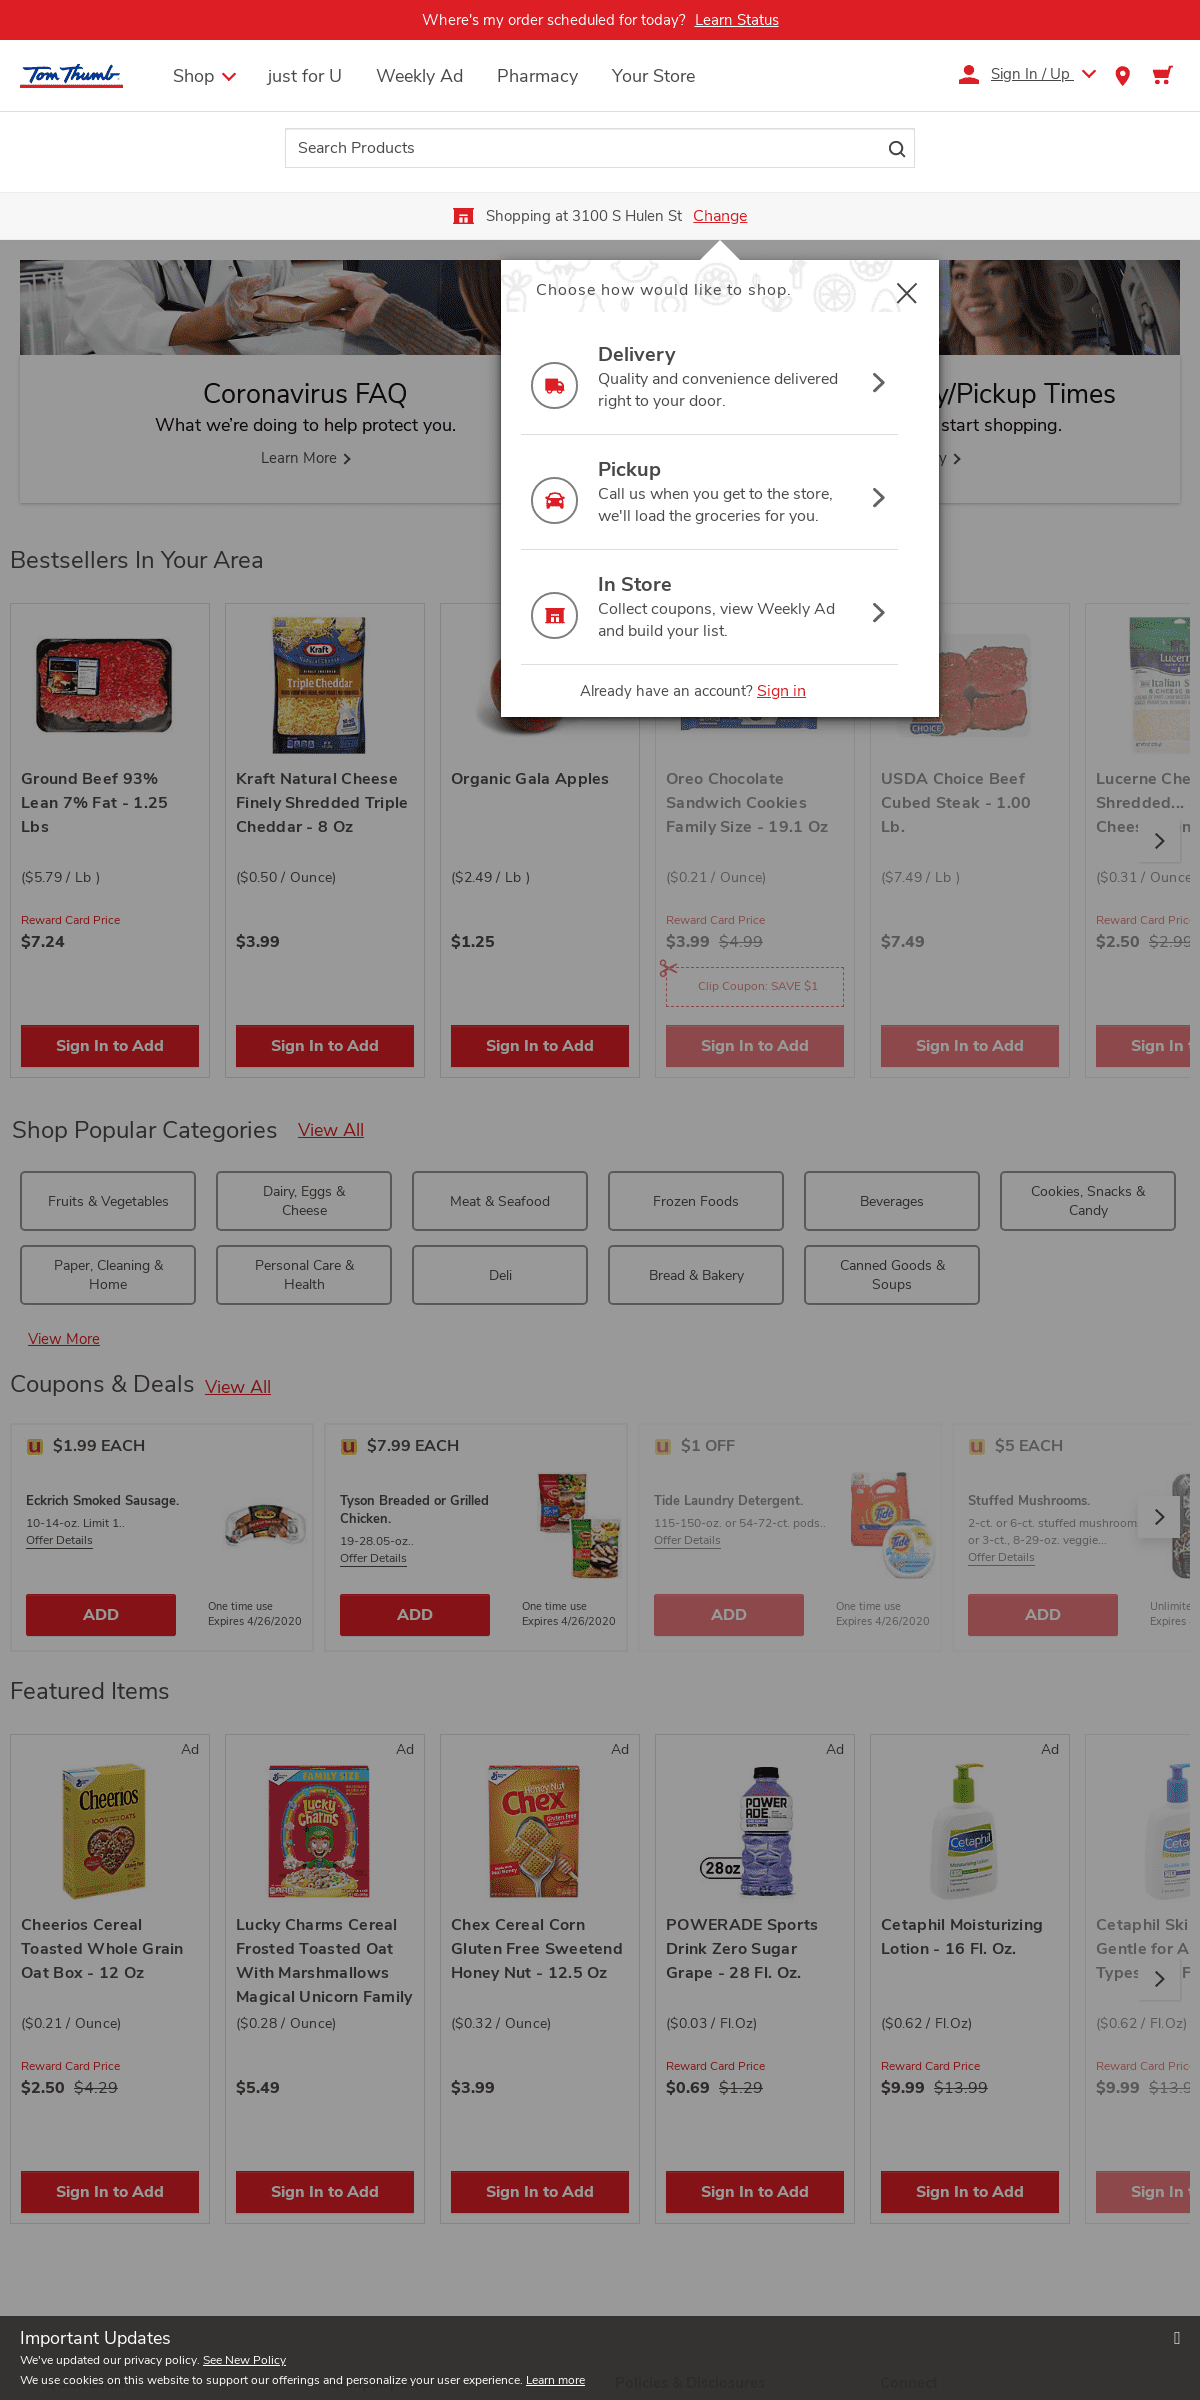 A complete backup of tomthumb.com